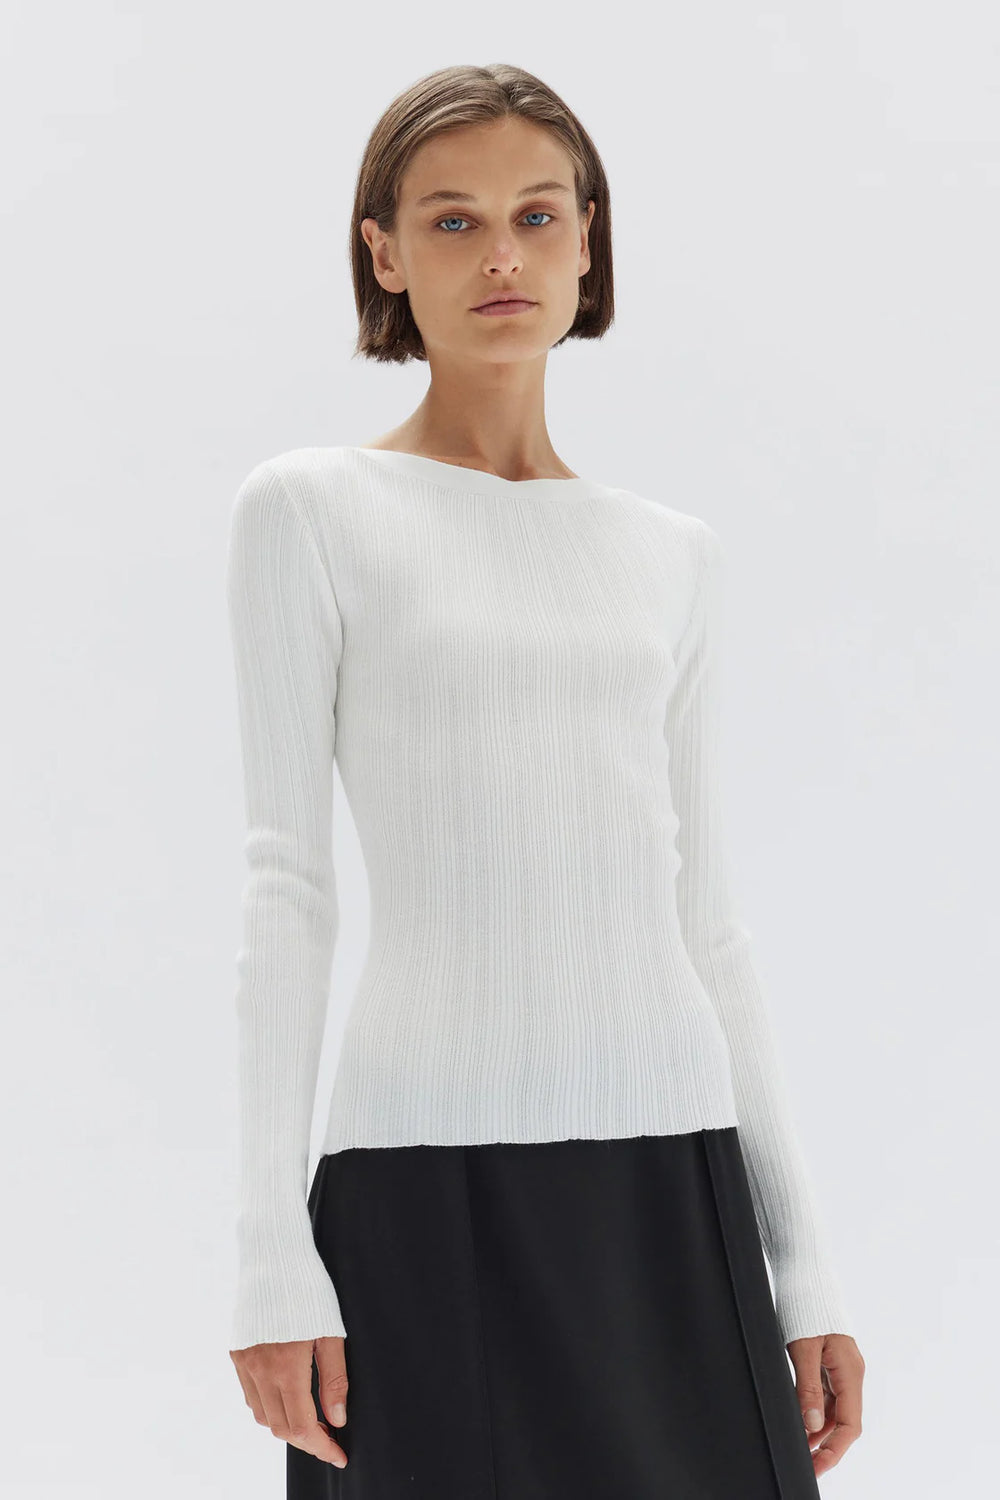 Vienna Knit Long Sleeve Top White